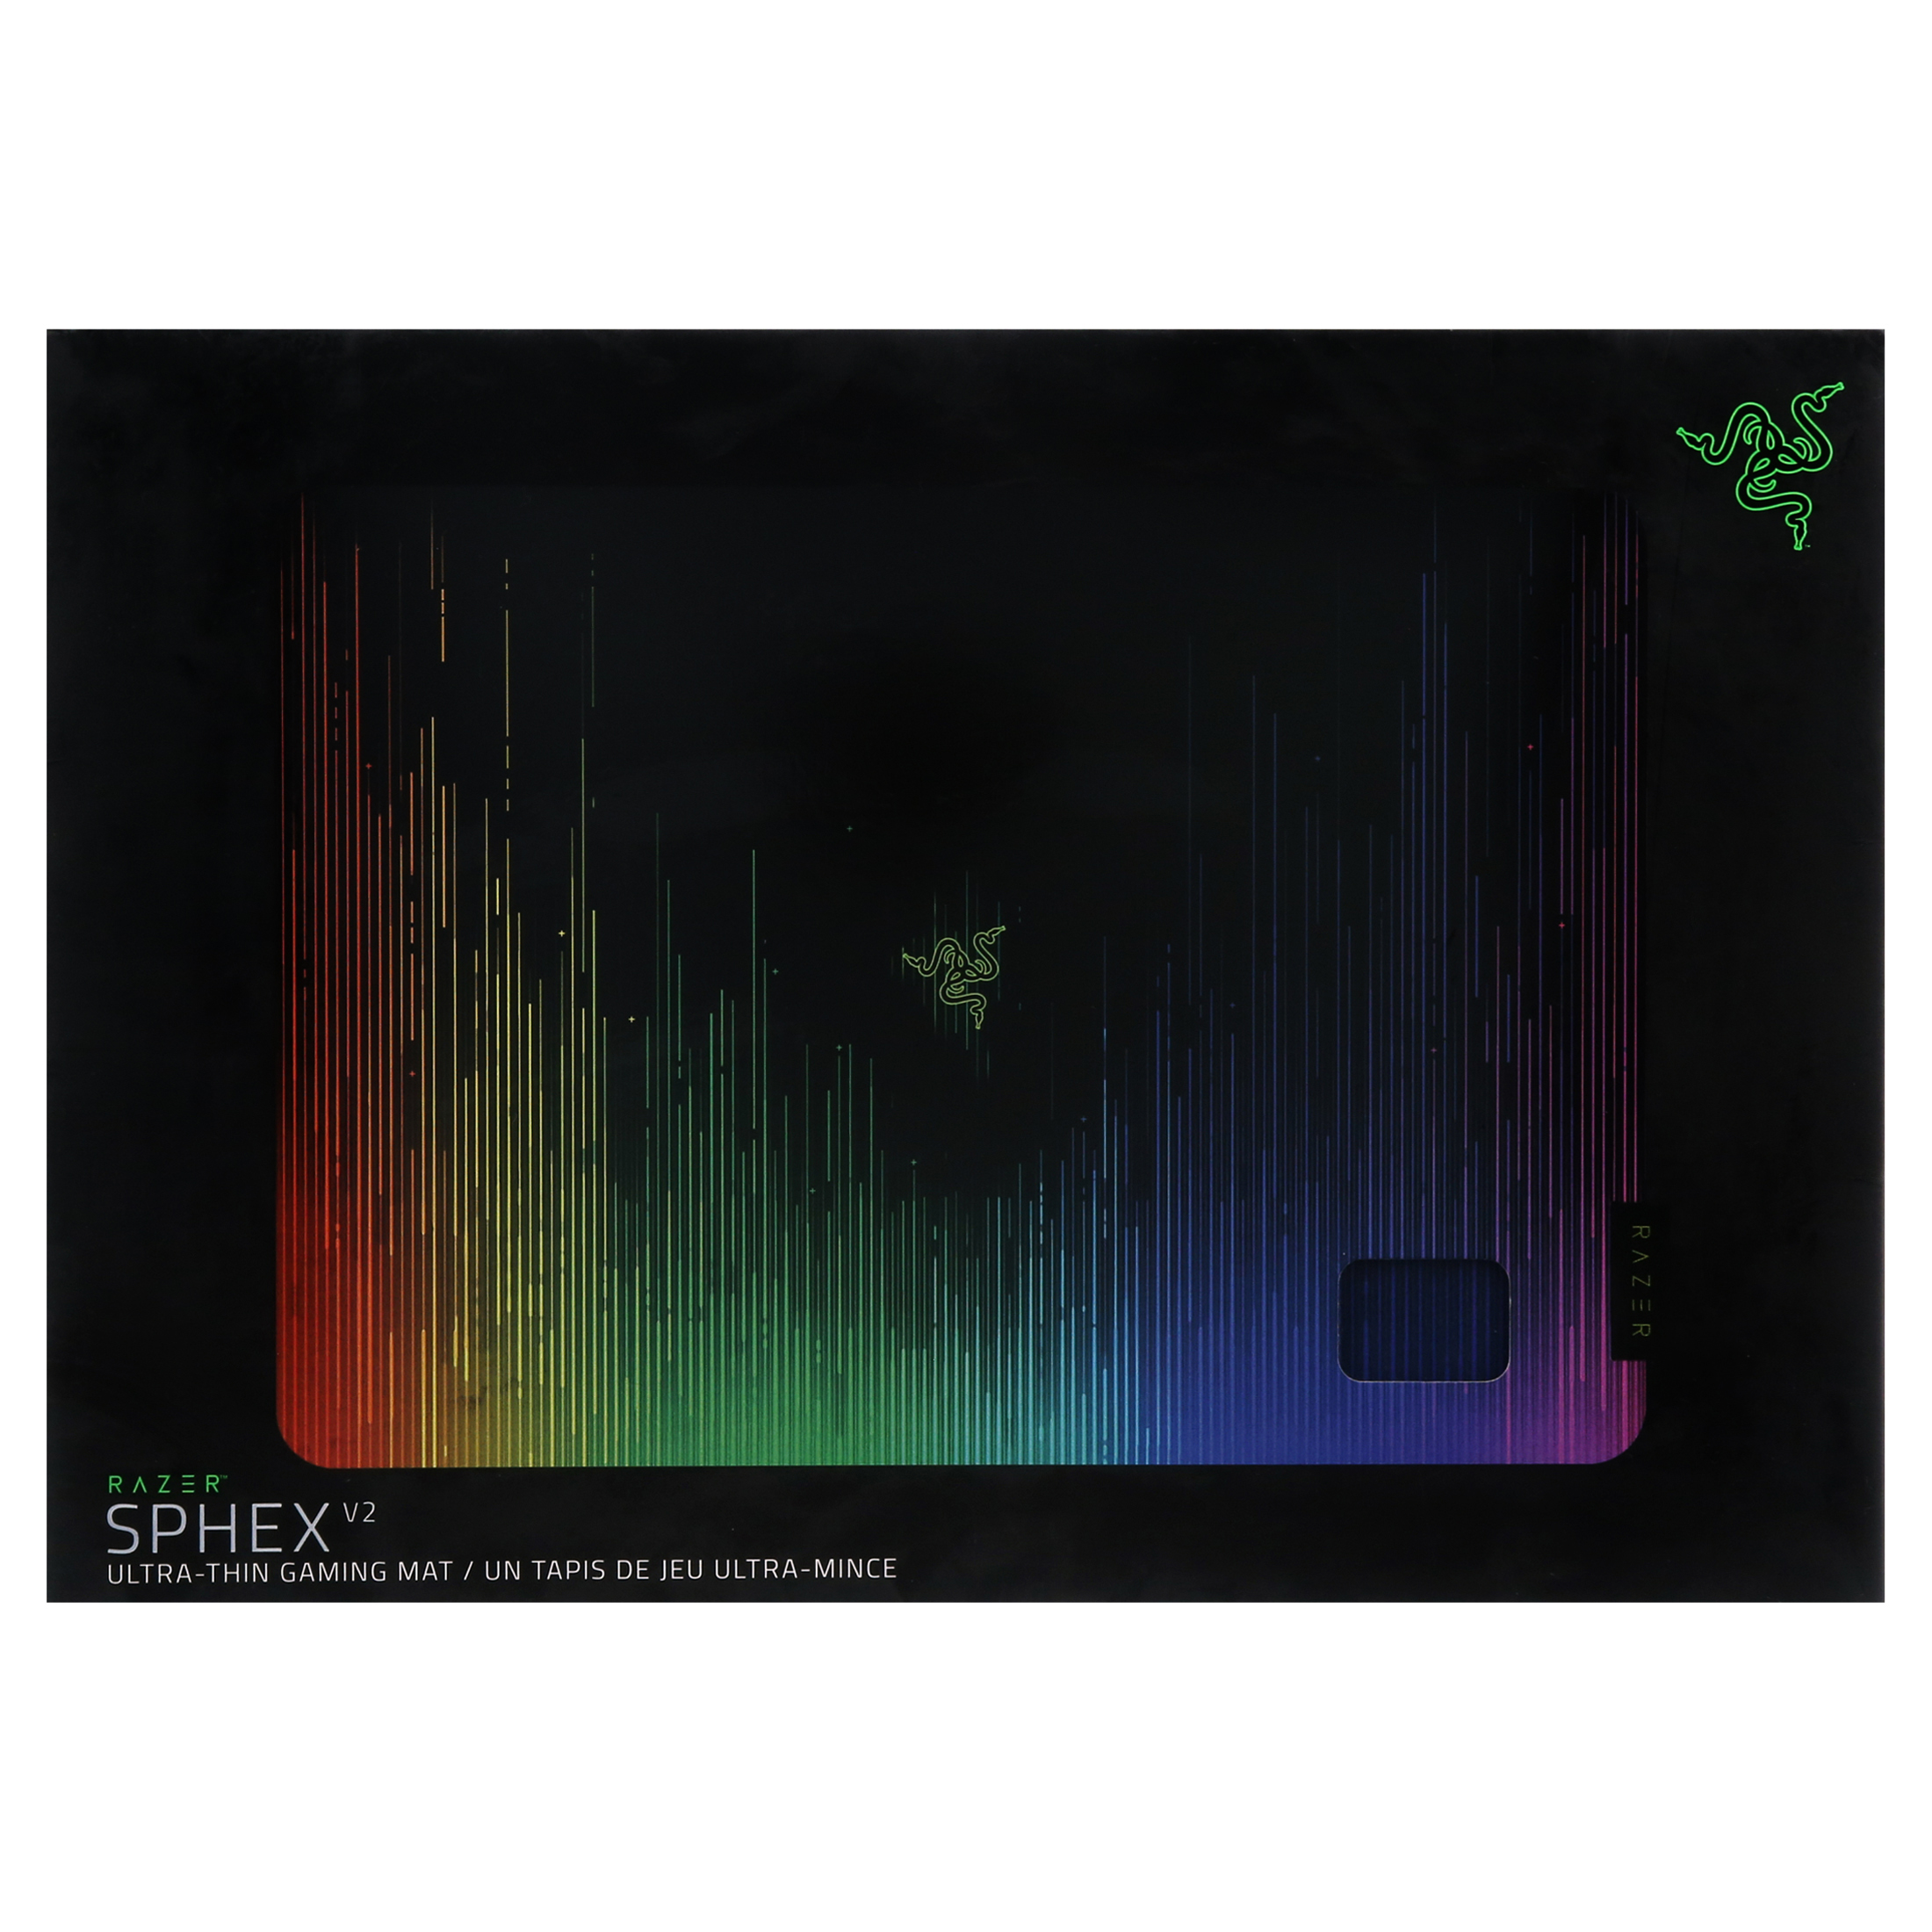 Razer Sphex V2 Ultra-Thin Form Factor - Optimized Gaming Surface - Polycarbonate Finish - Gaming Mouse Mat - image 5 of 10